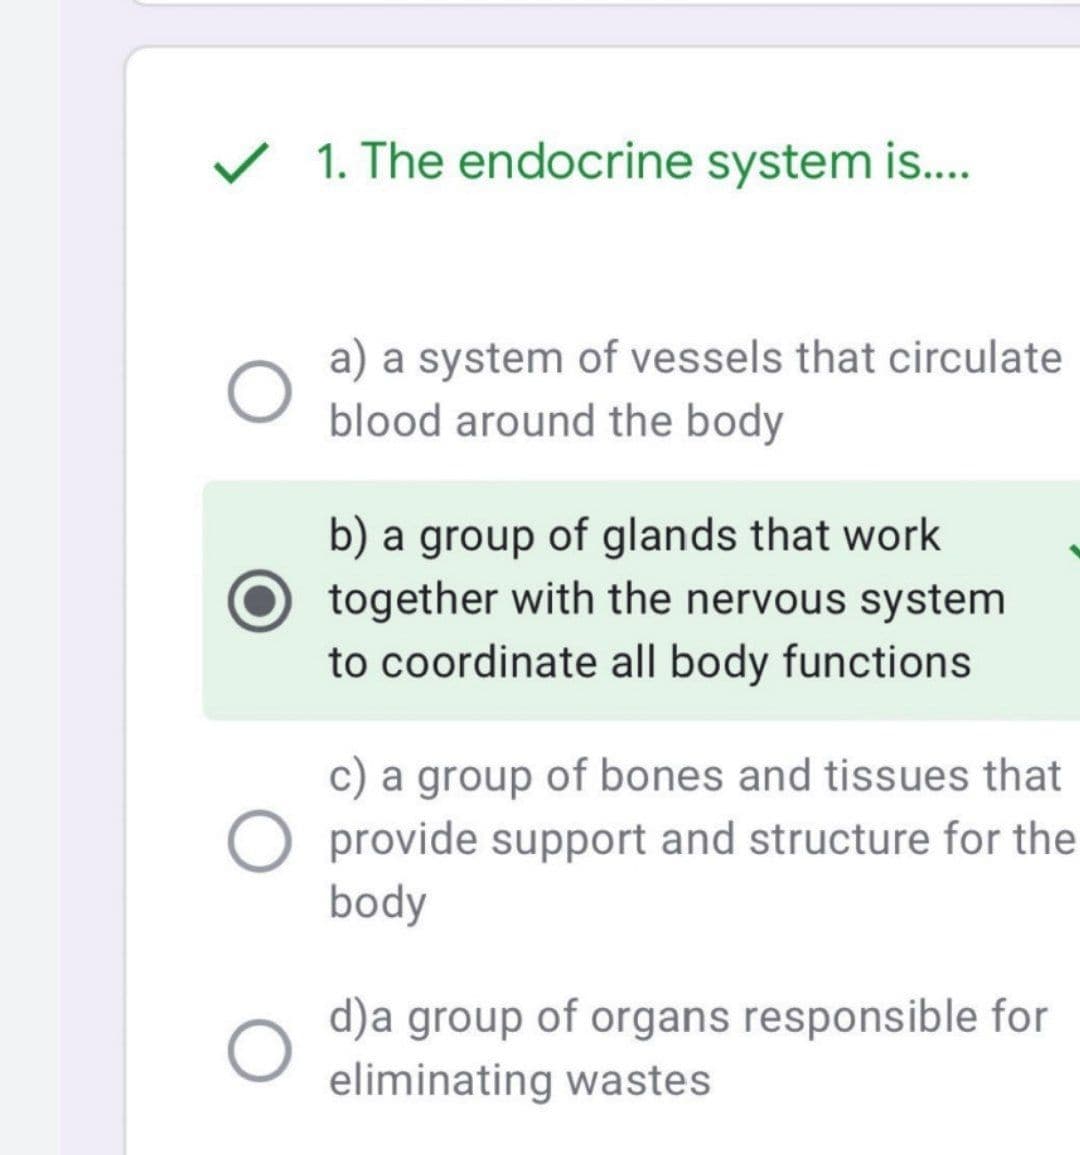 ✓ 1. The endocrine system is....
O
a) a system of vessels that circulate
blood around the body
b) a group of glands that work
together with the nervous system
to coordinate all body functions
c) a group of bones and tissues that
provide support and structure for the
body
d)a group of organs responsible for
eliminating wastes